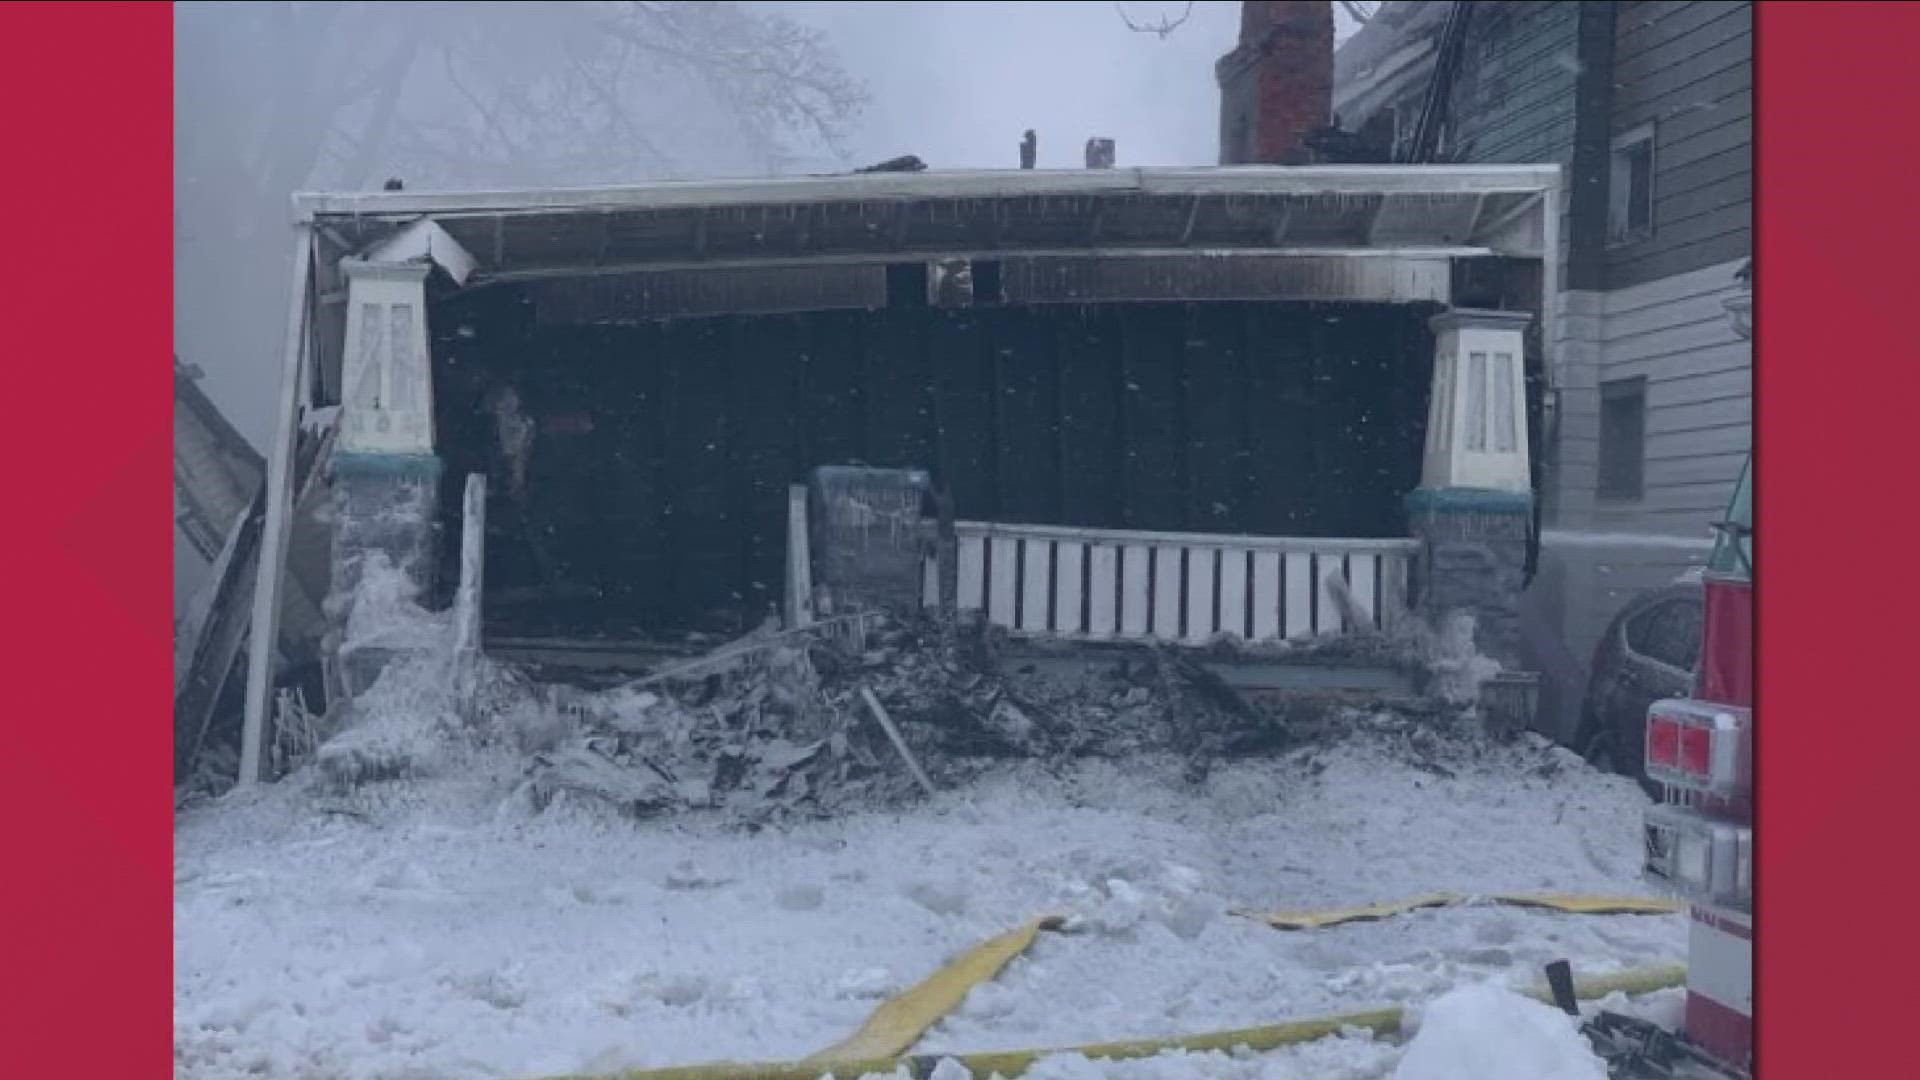 On Monday, a house fire in Buffalo spread to three nearby homes on Lonsdale Road and left 20 people in need of help.